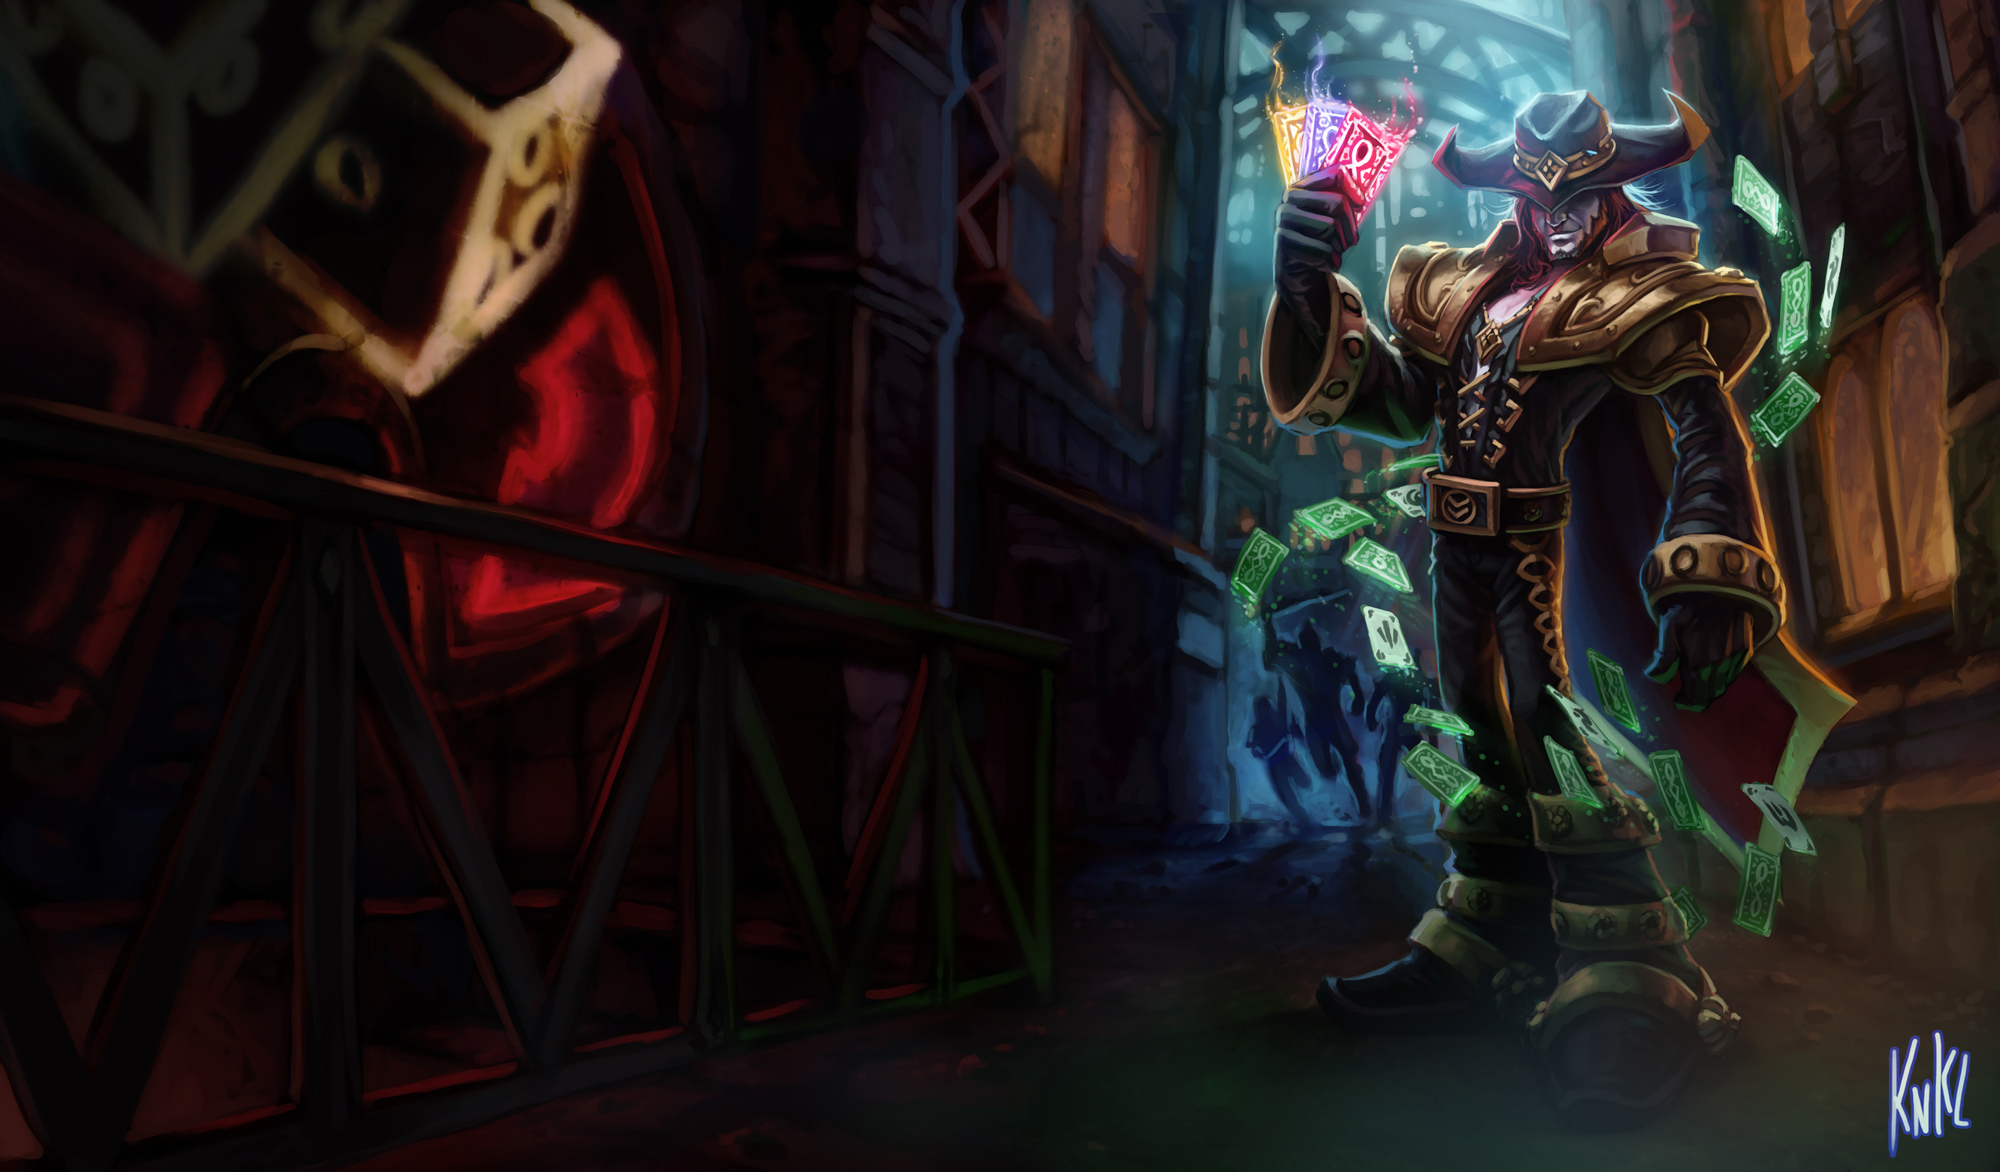 twisted fate (league of legends), video game, league of legends